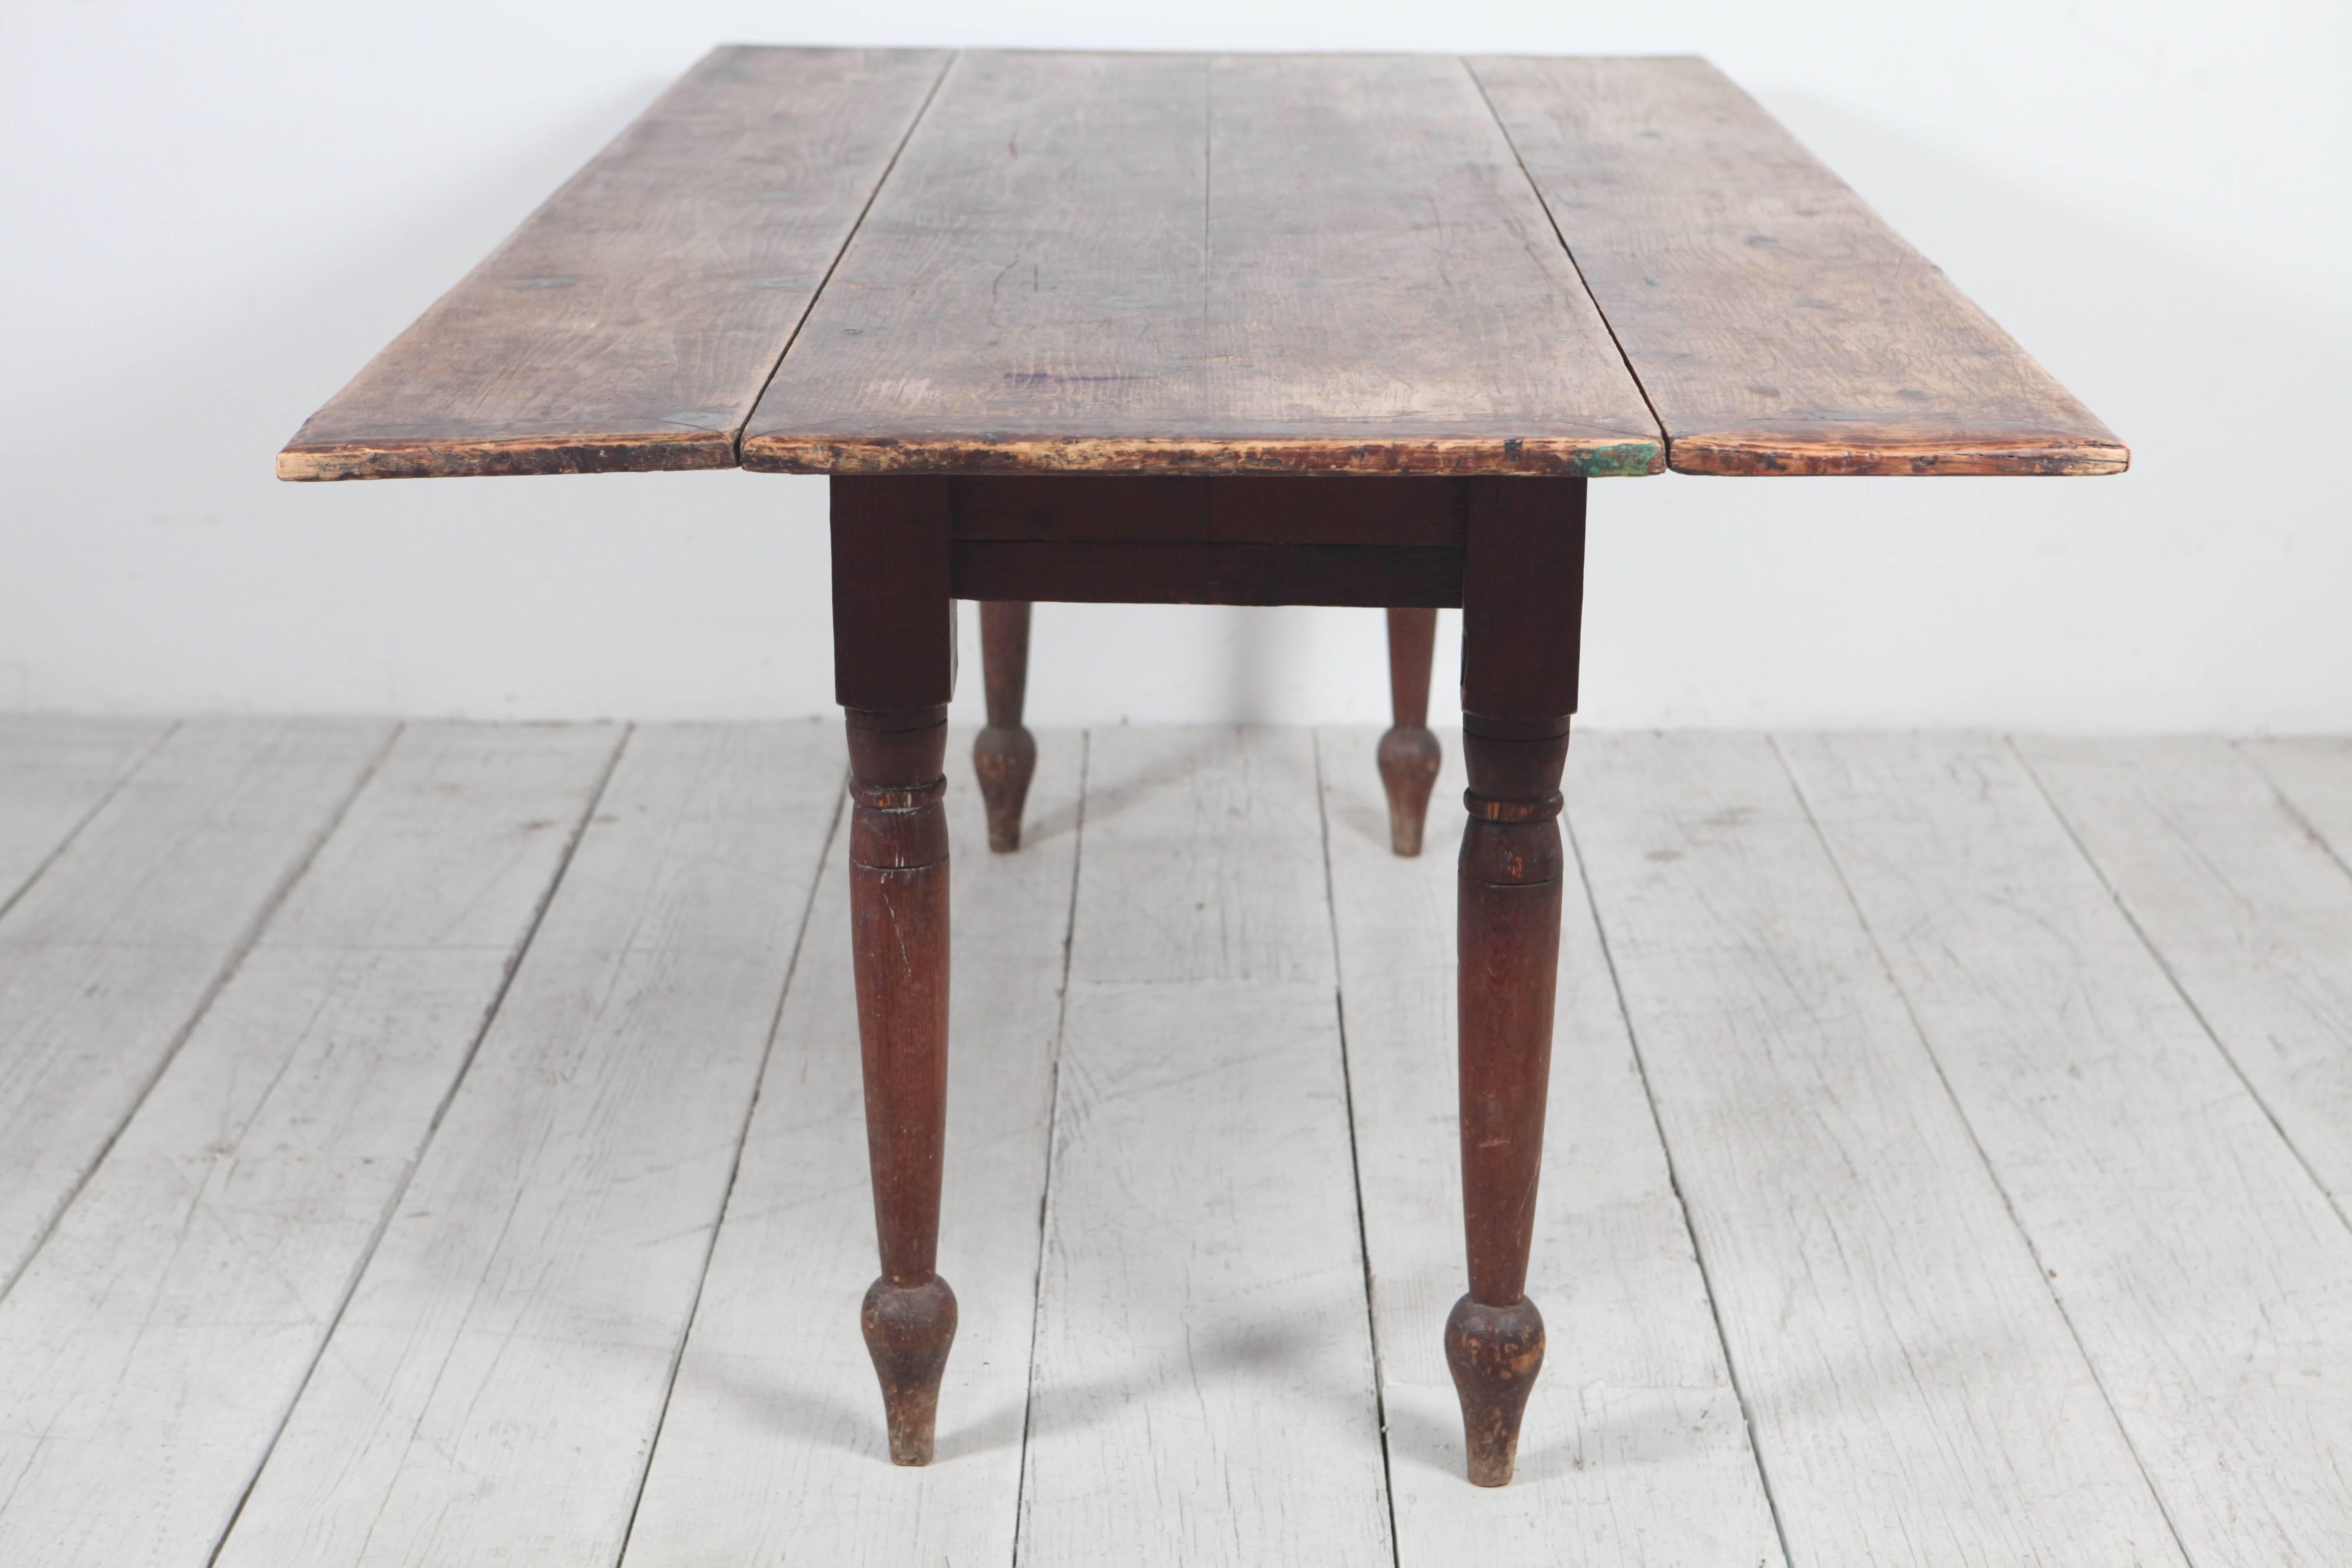 Rustic Drop-Leaf Wooden Table with Turned Legs 2